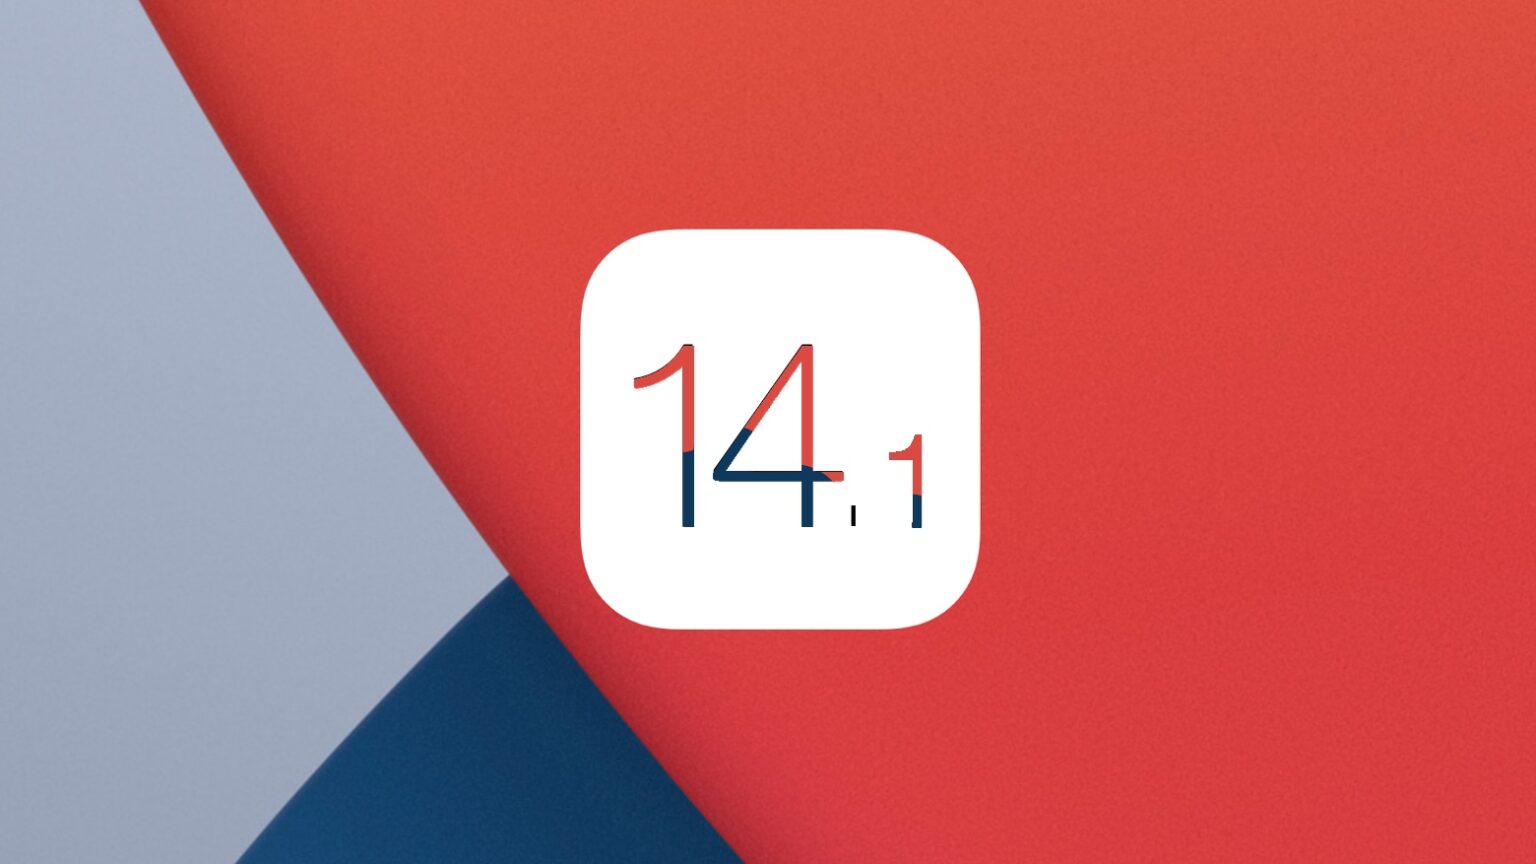 iOS 14.1 is almost here.